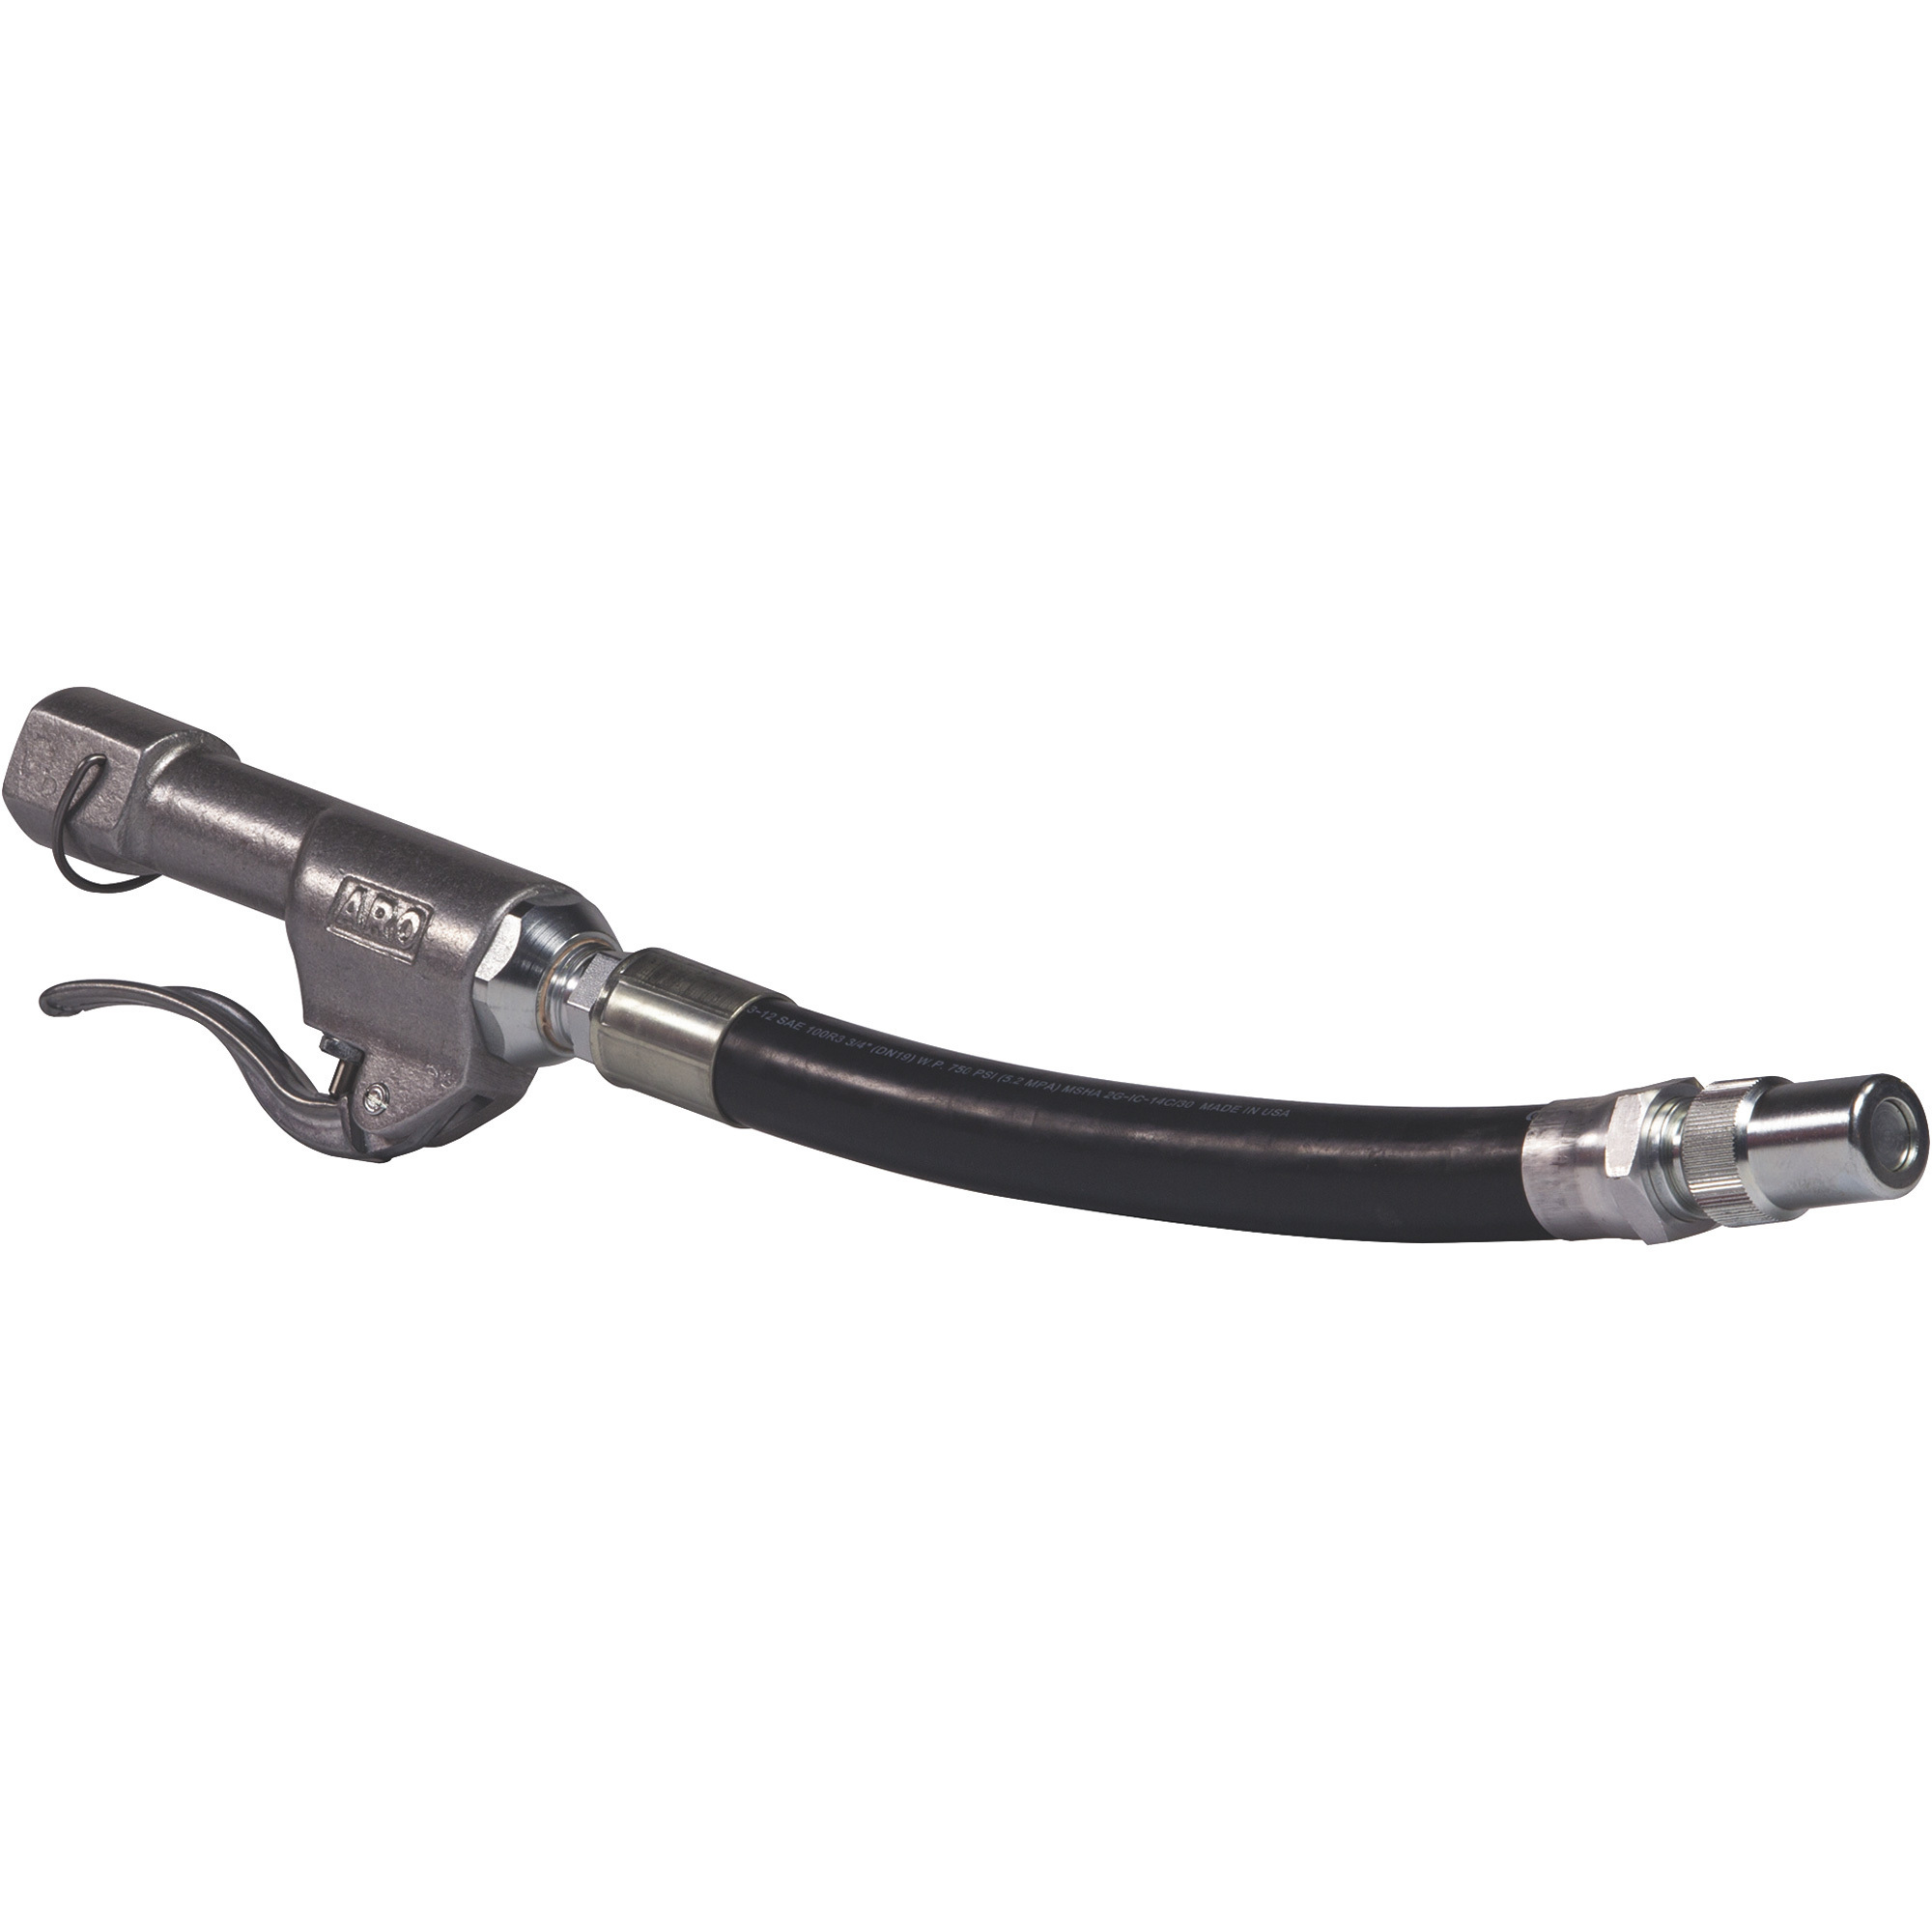 ARO High-Volume Oil Control Handle with Flexible Hose and Non-Drip Tip, 600 PSI, Model 635193